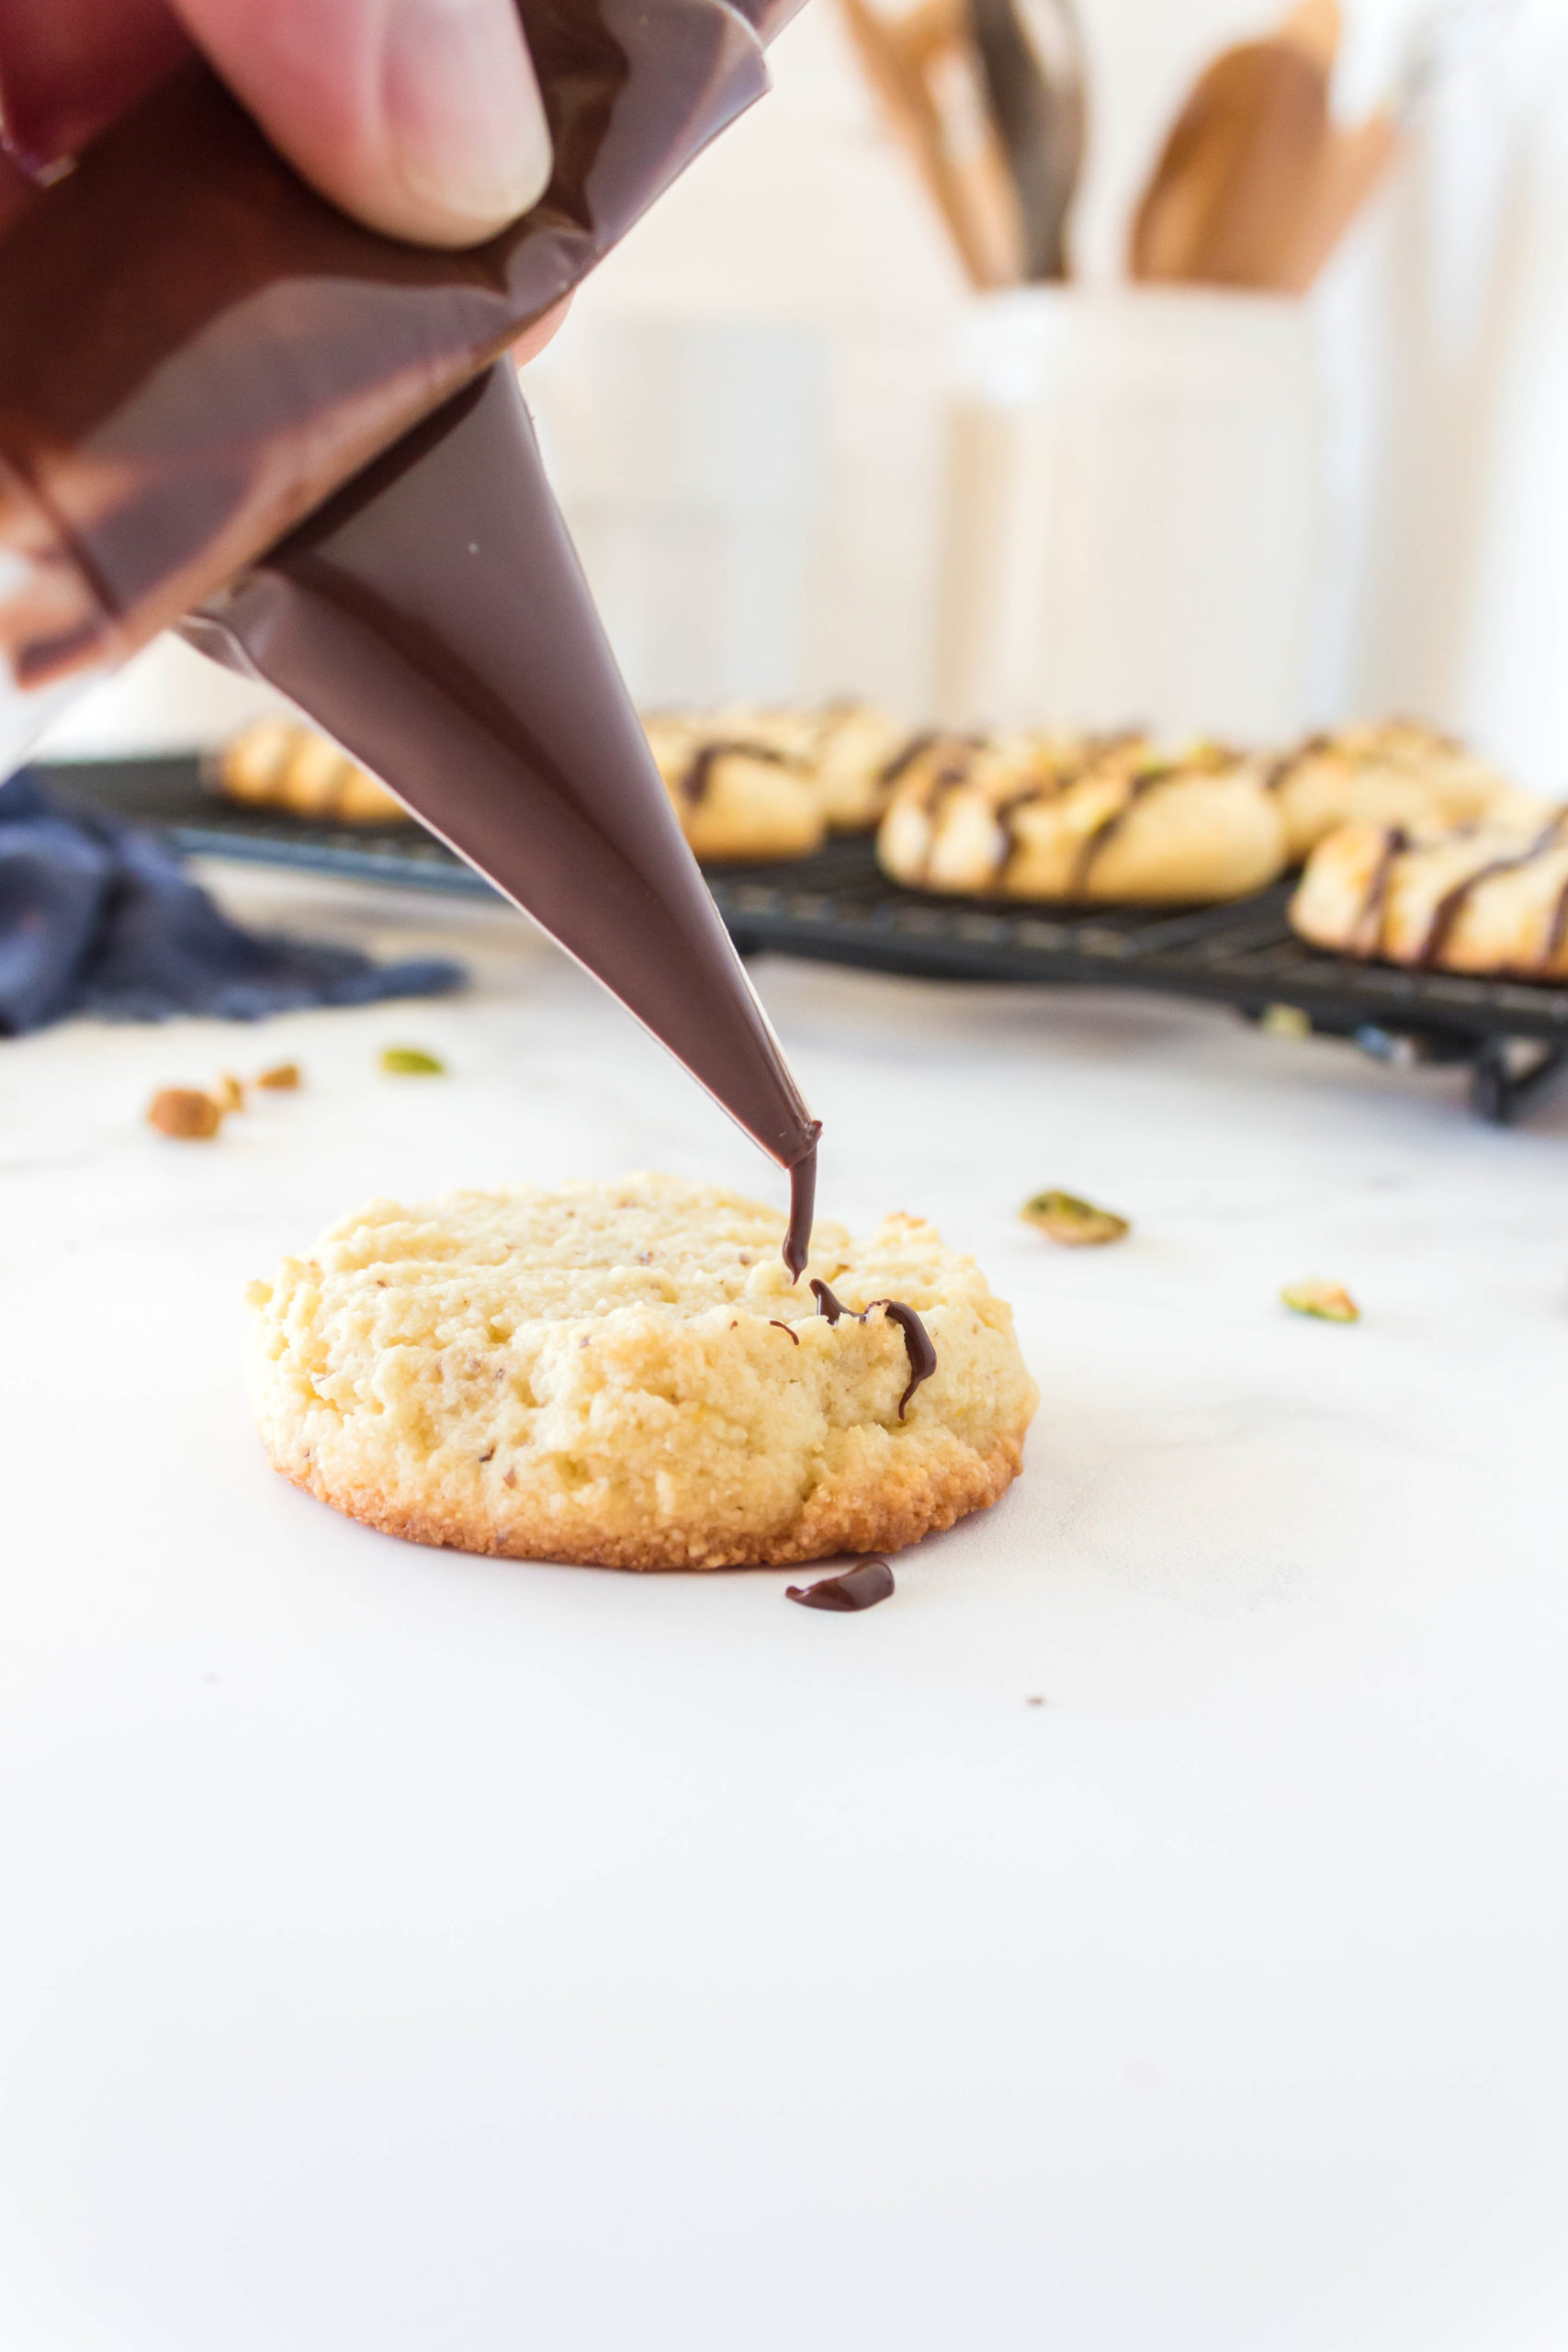 Picture of one keto butter cookie with chocolate being drizzled on top.